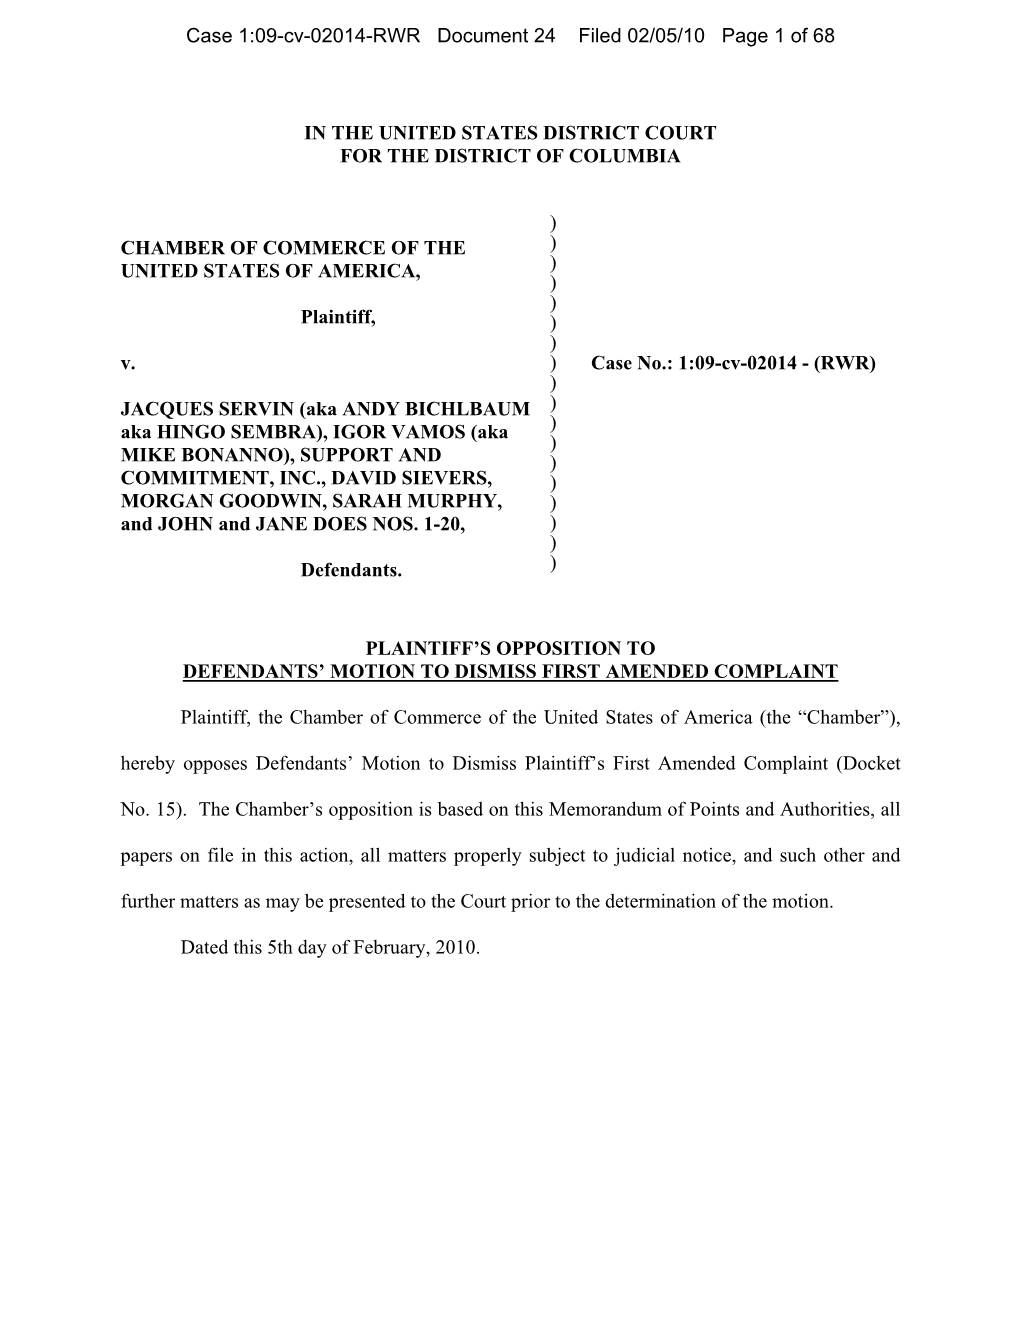 Case 1:09-Cv-02014-RWR Document 24 Filed 02/05/10 Page 1 of 68